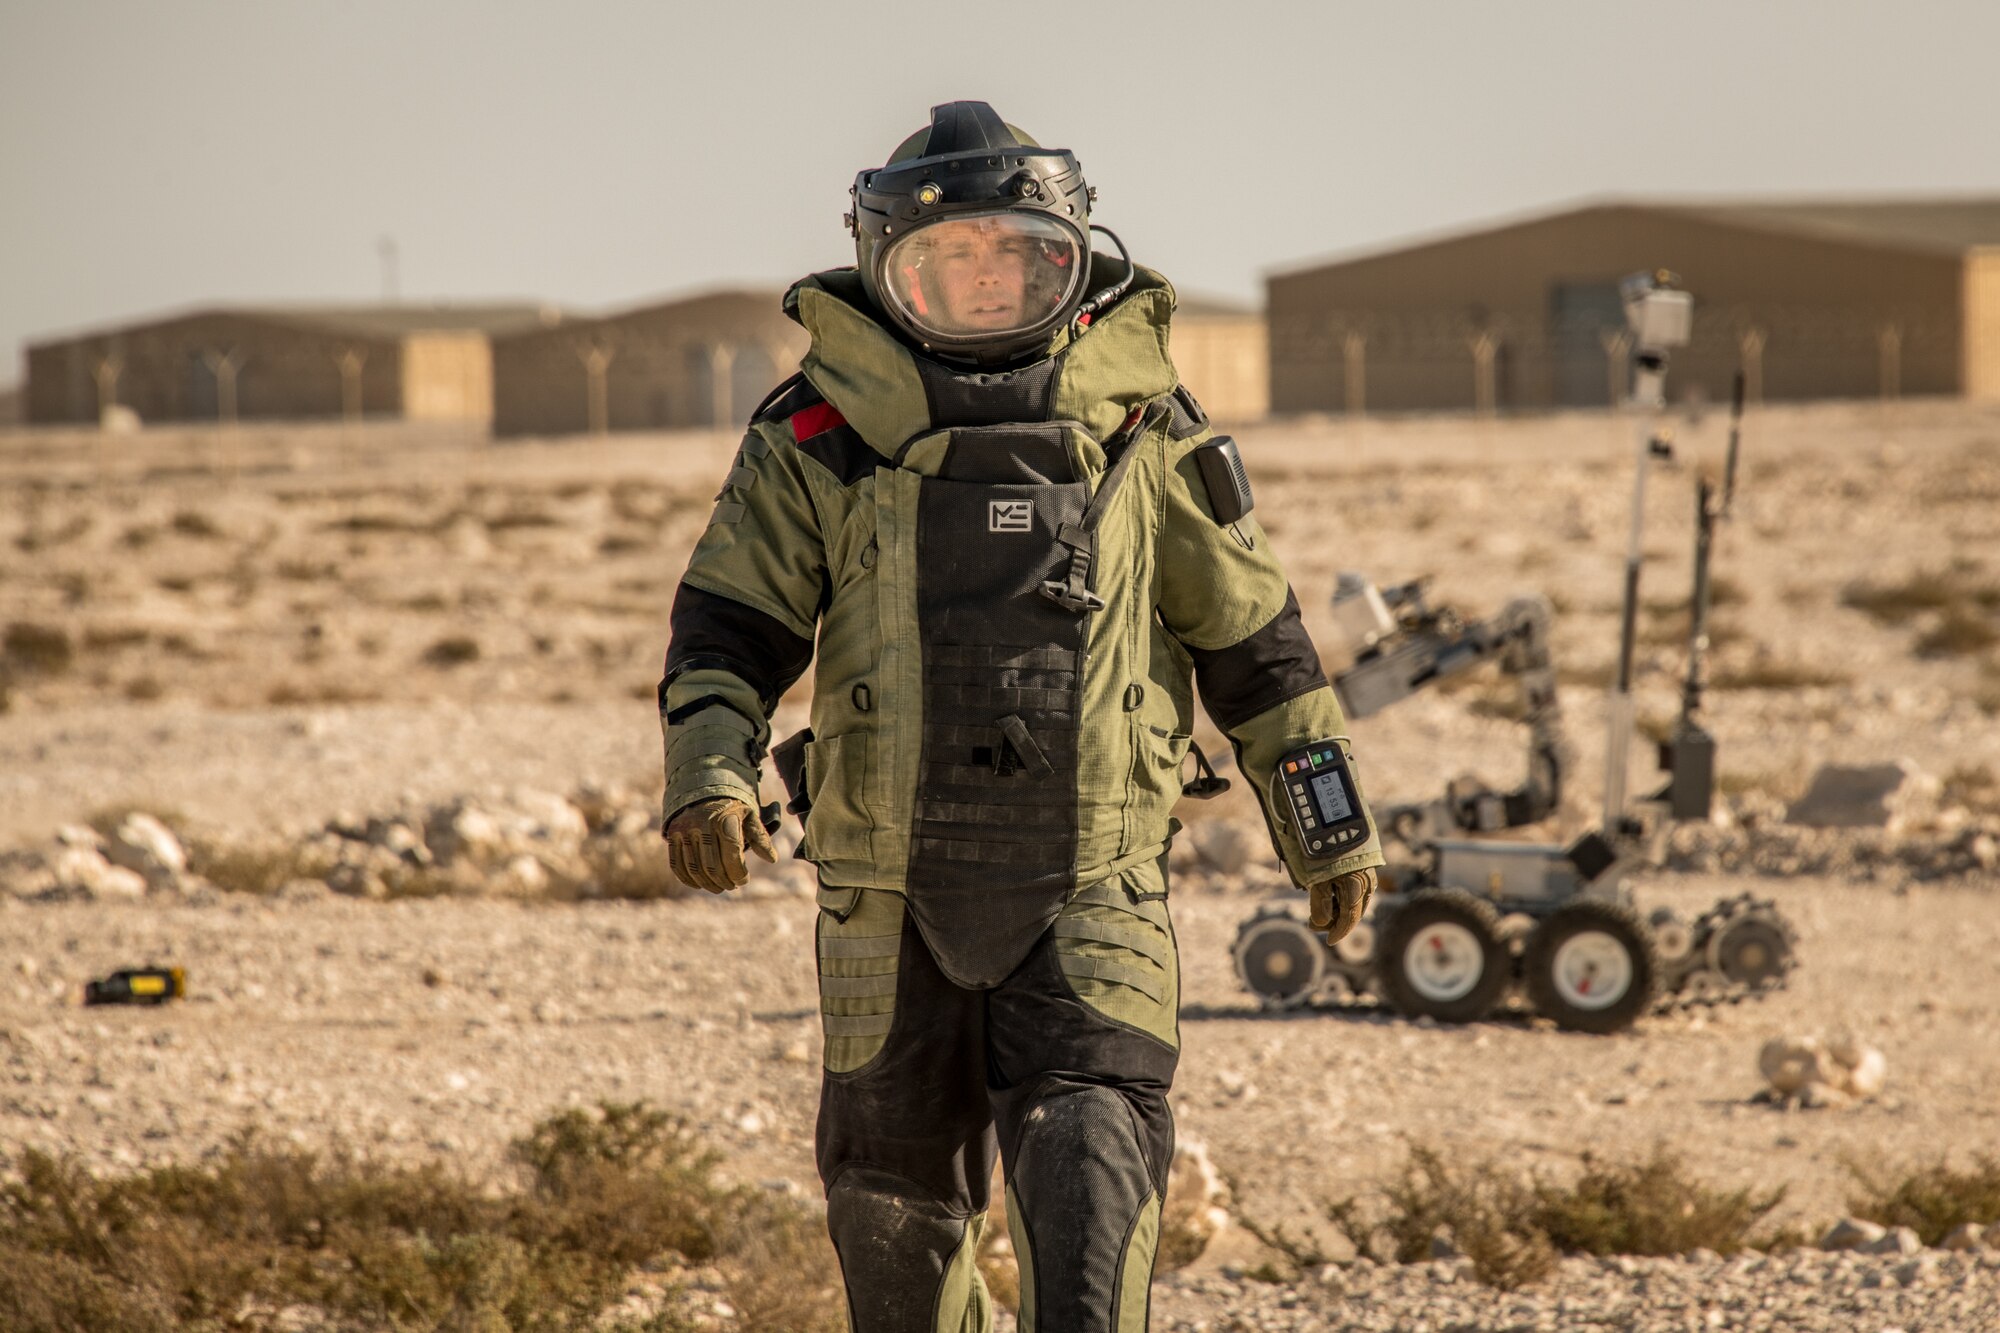 A man walks in an explosive ordnance disposal protection suit